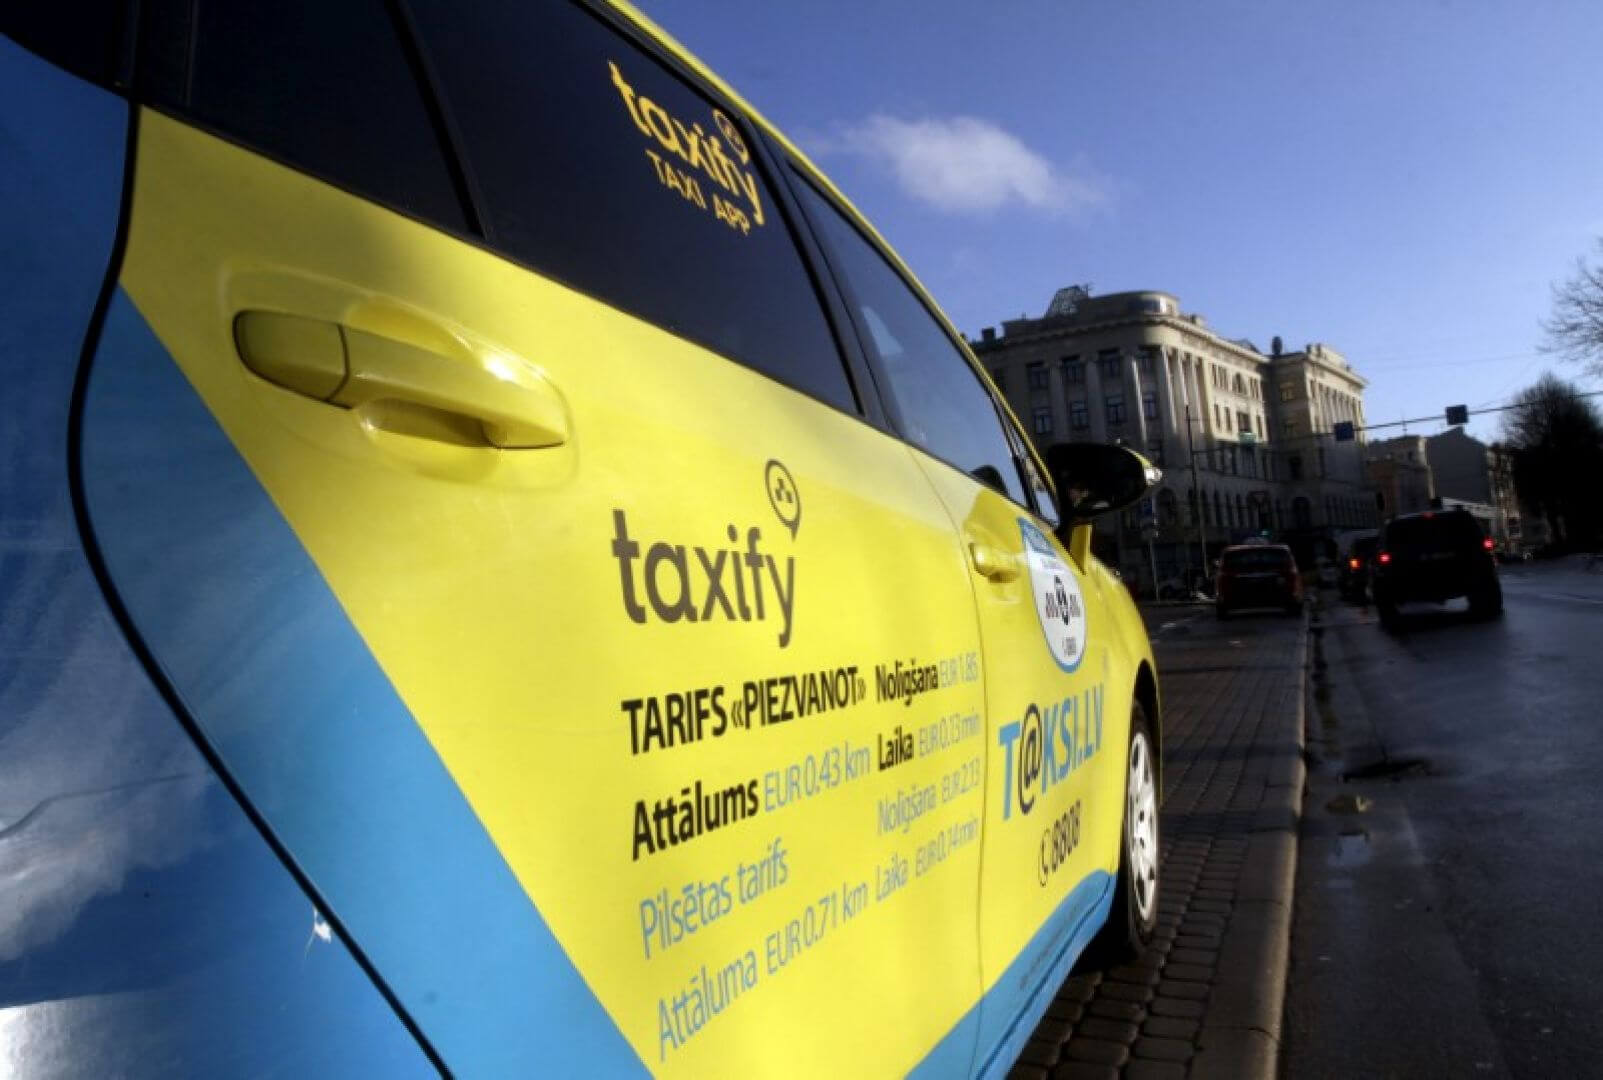 Uber-rival Taxify stops London operations after three days